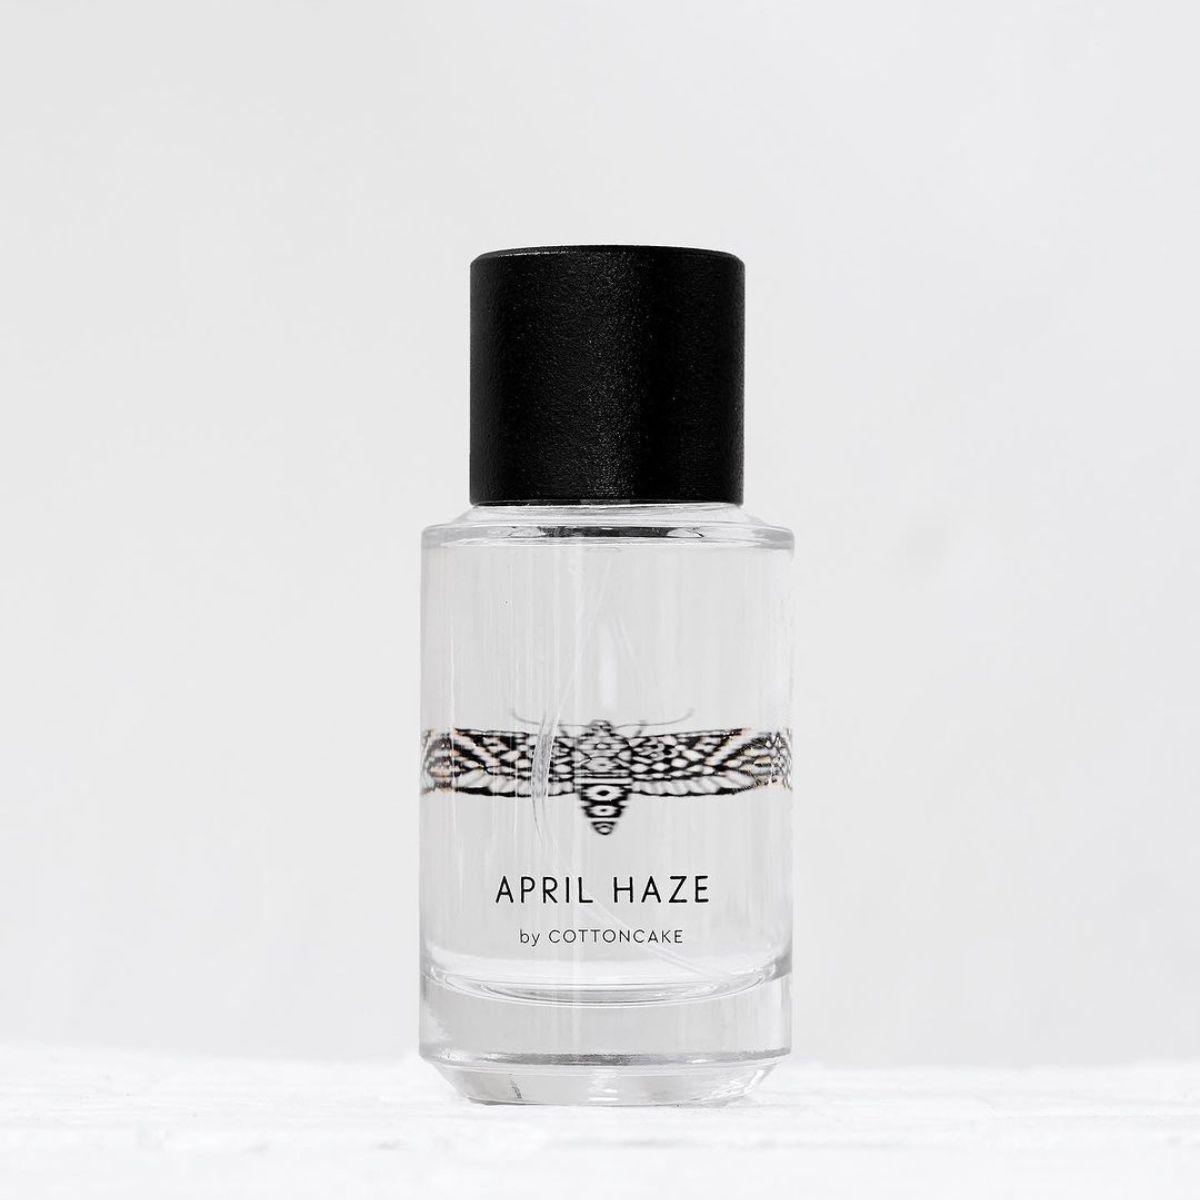 Image of April Haze by the perfume brand Cottoncake